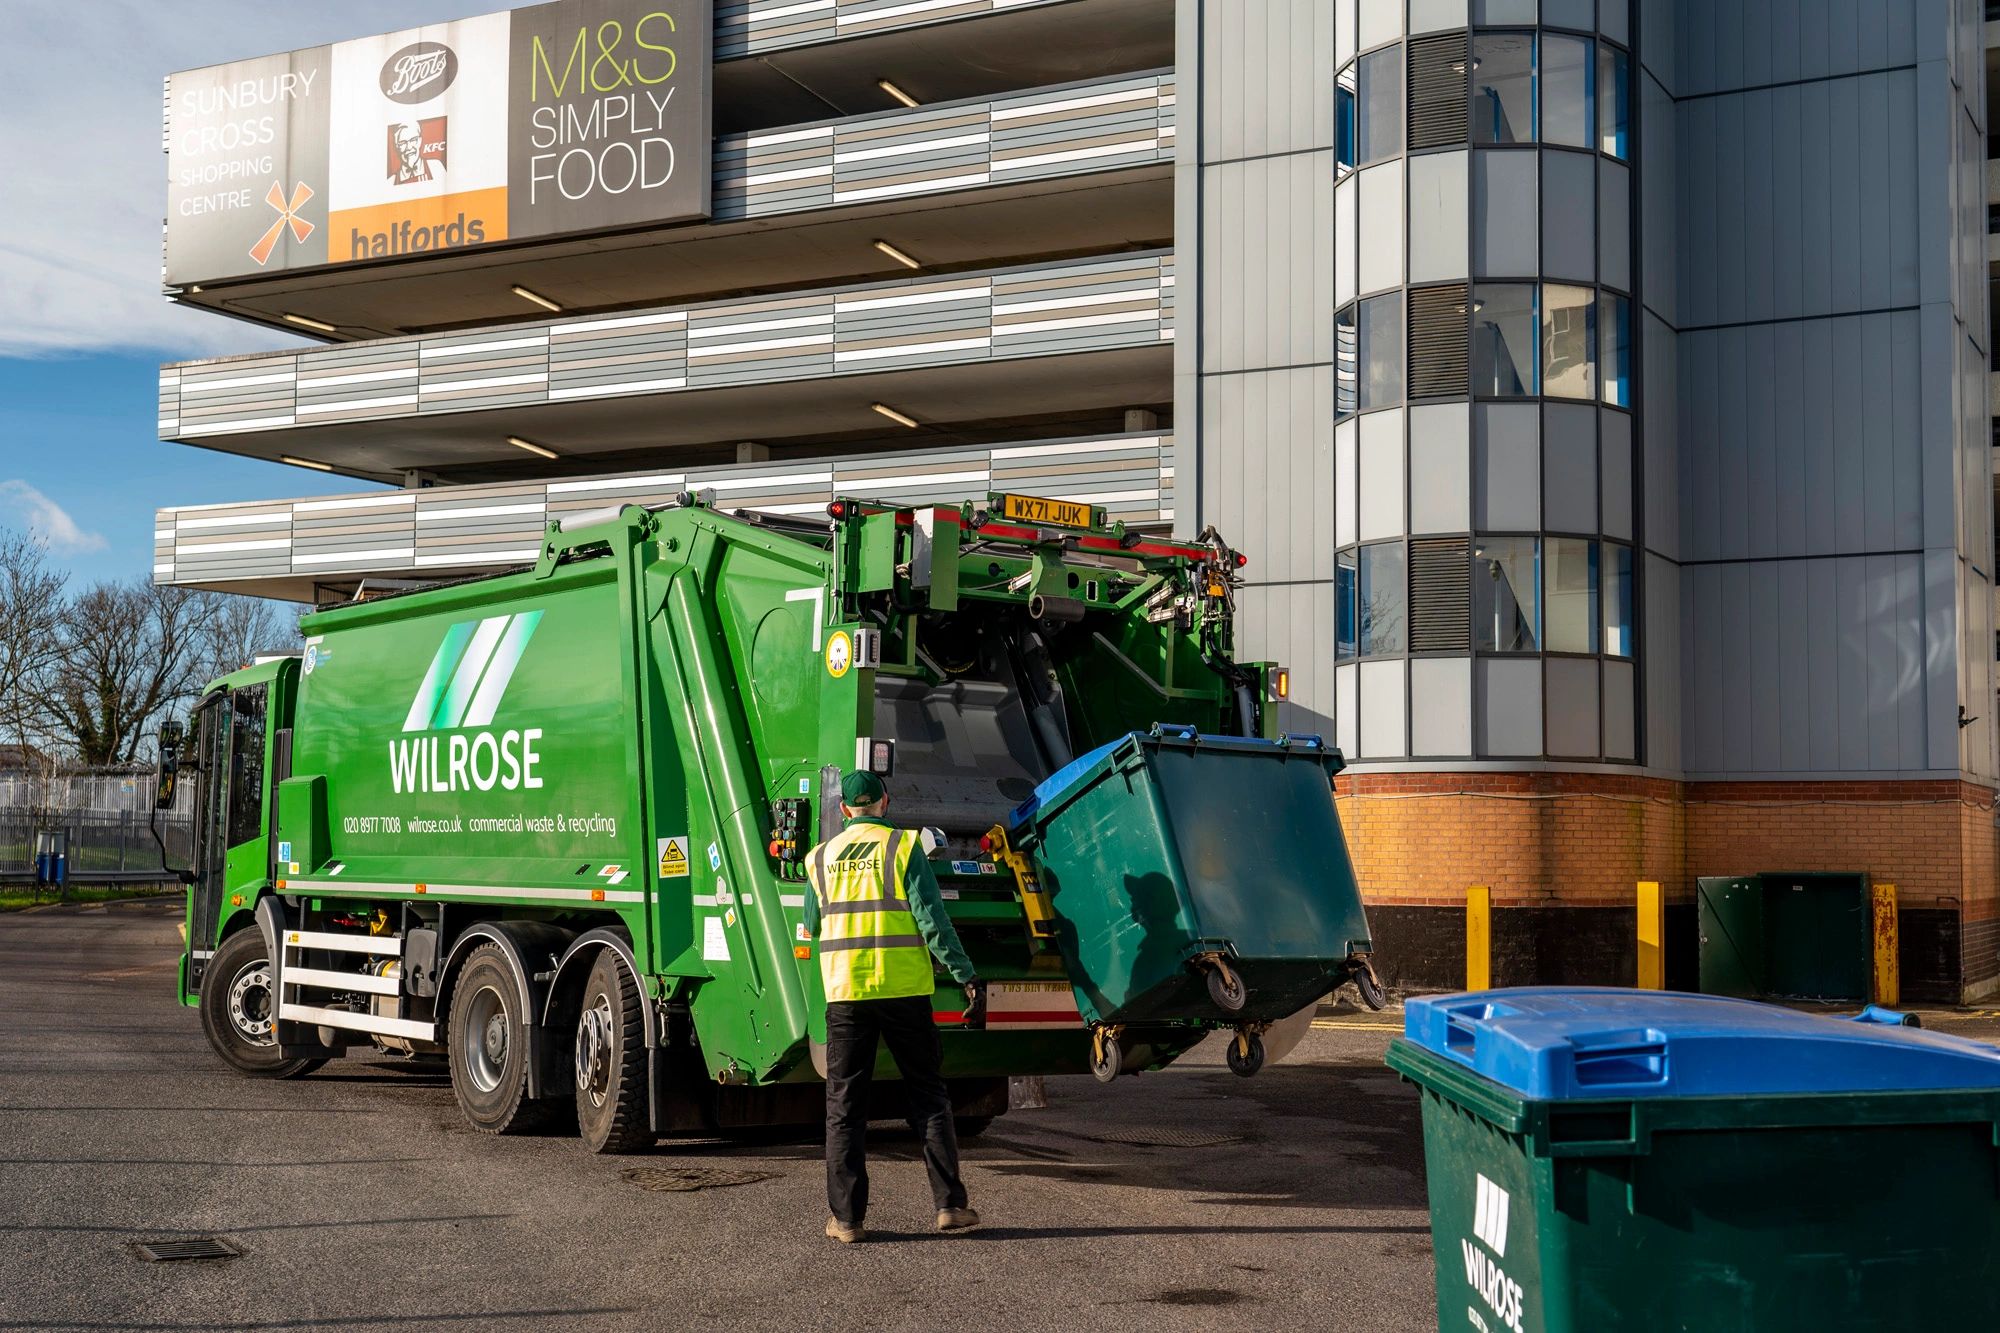 Commercial dustcart collecting general waste in Wandsworth borough of London.